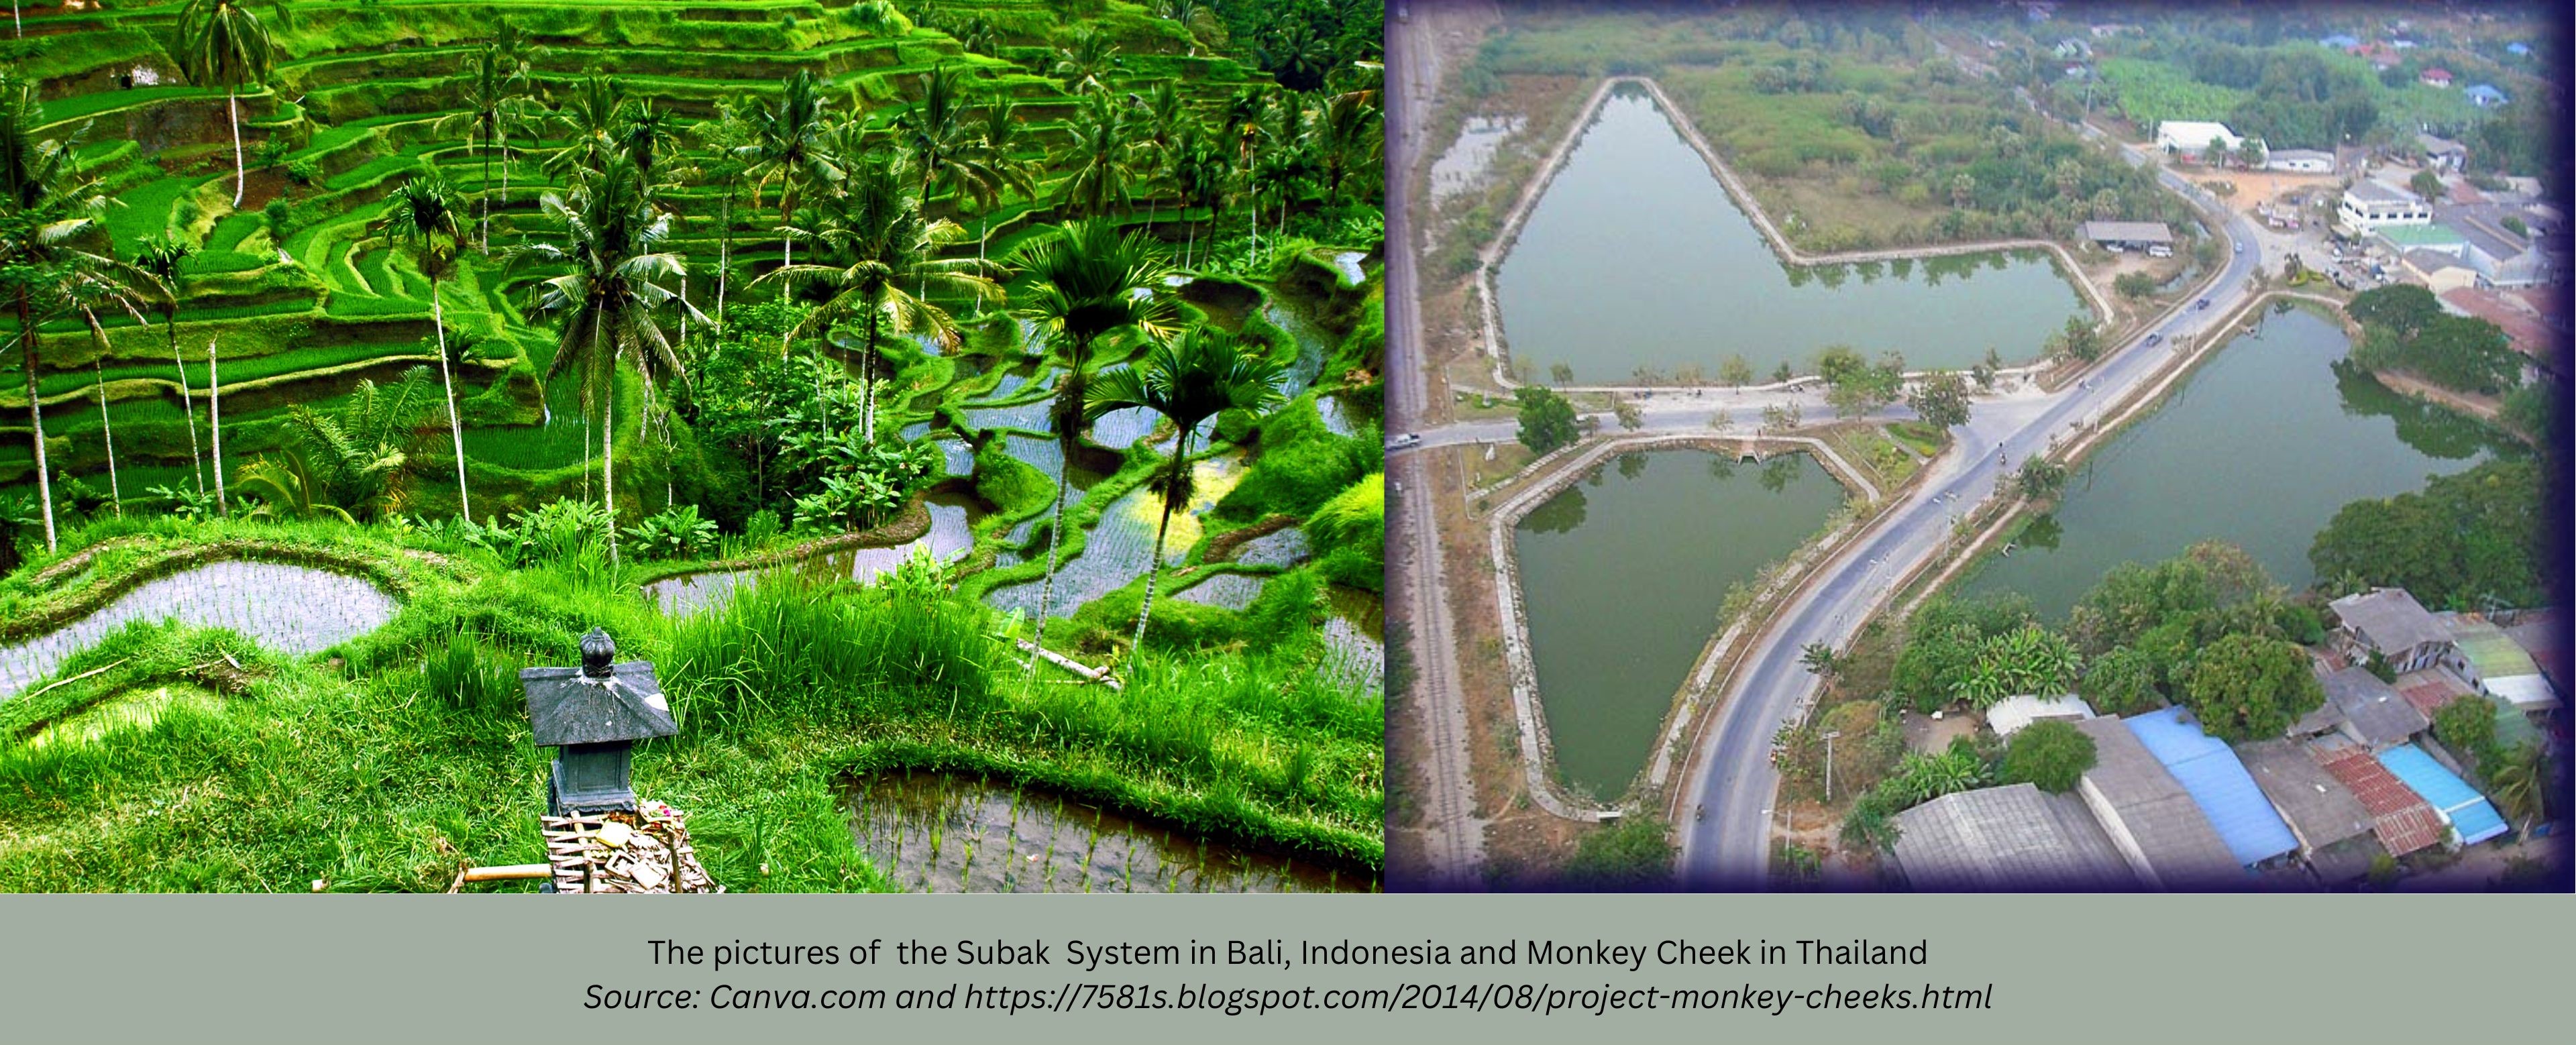 Cultural Resilience: Social Science Perspectives on Traditional Water Practices in Southeast Asia